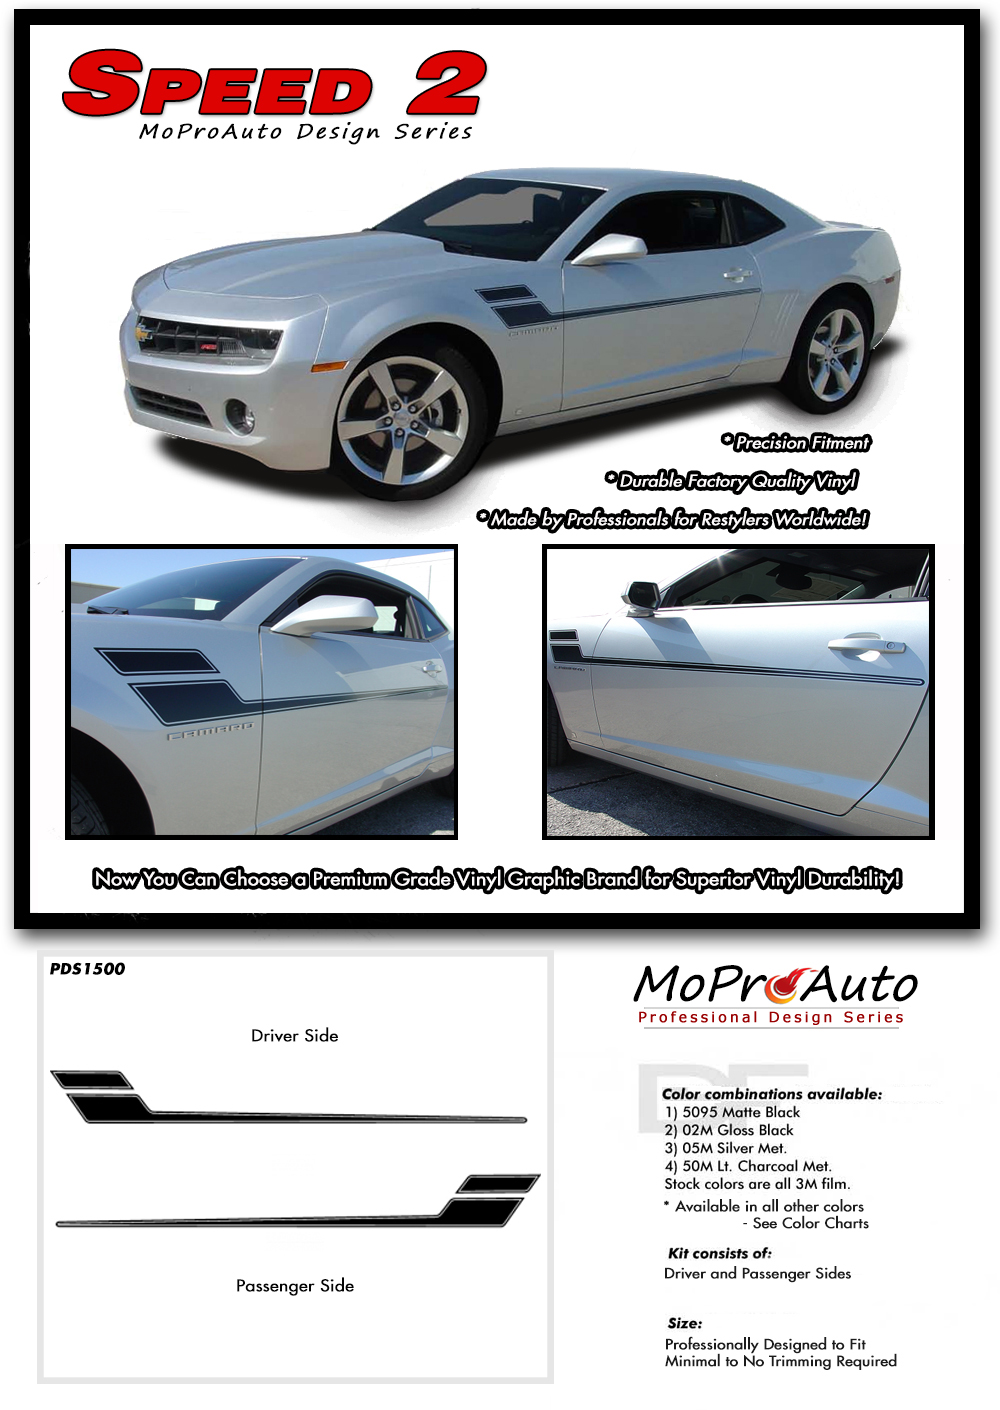 2014-2015 Speed Chevy Camaro Vinyl Graphics Kits, Decals, Stripes by MoProAuto